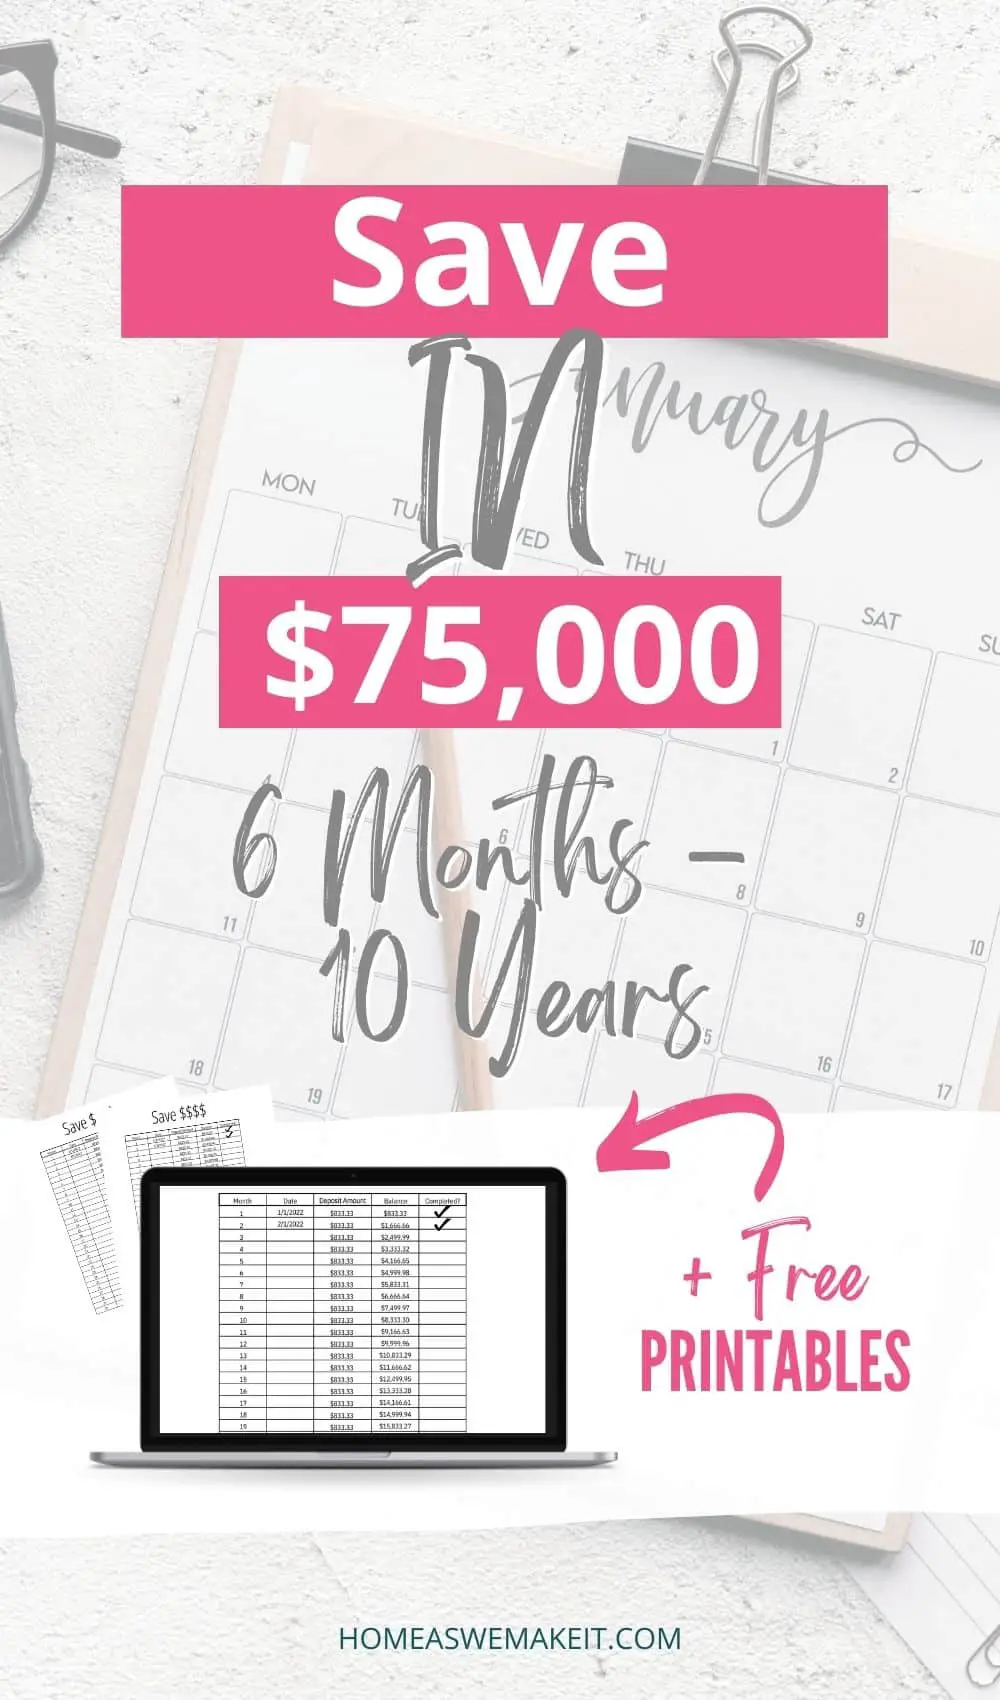 Save $75,000 in 6 months to 1 year with free printable savings trackers